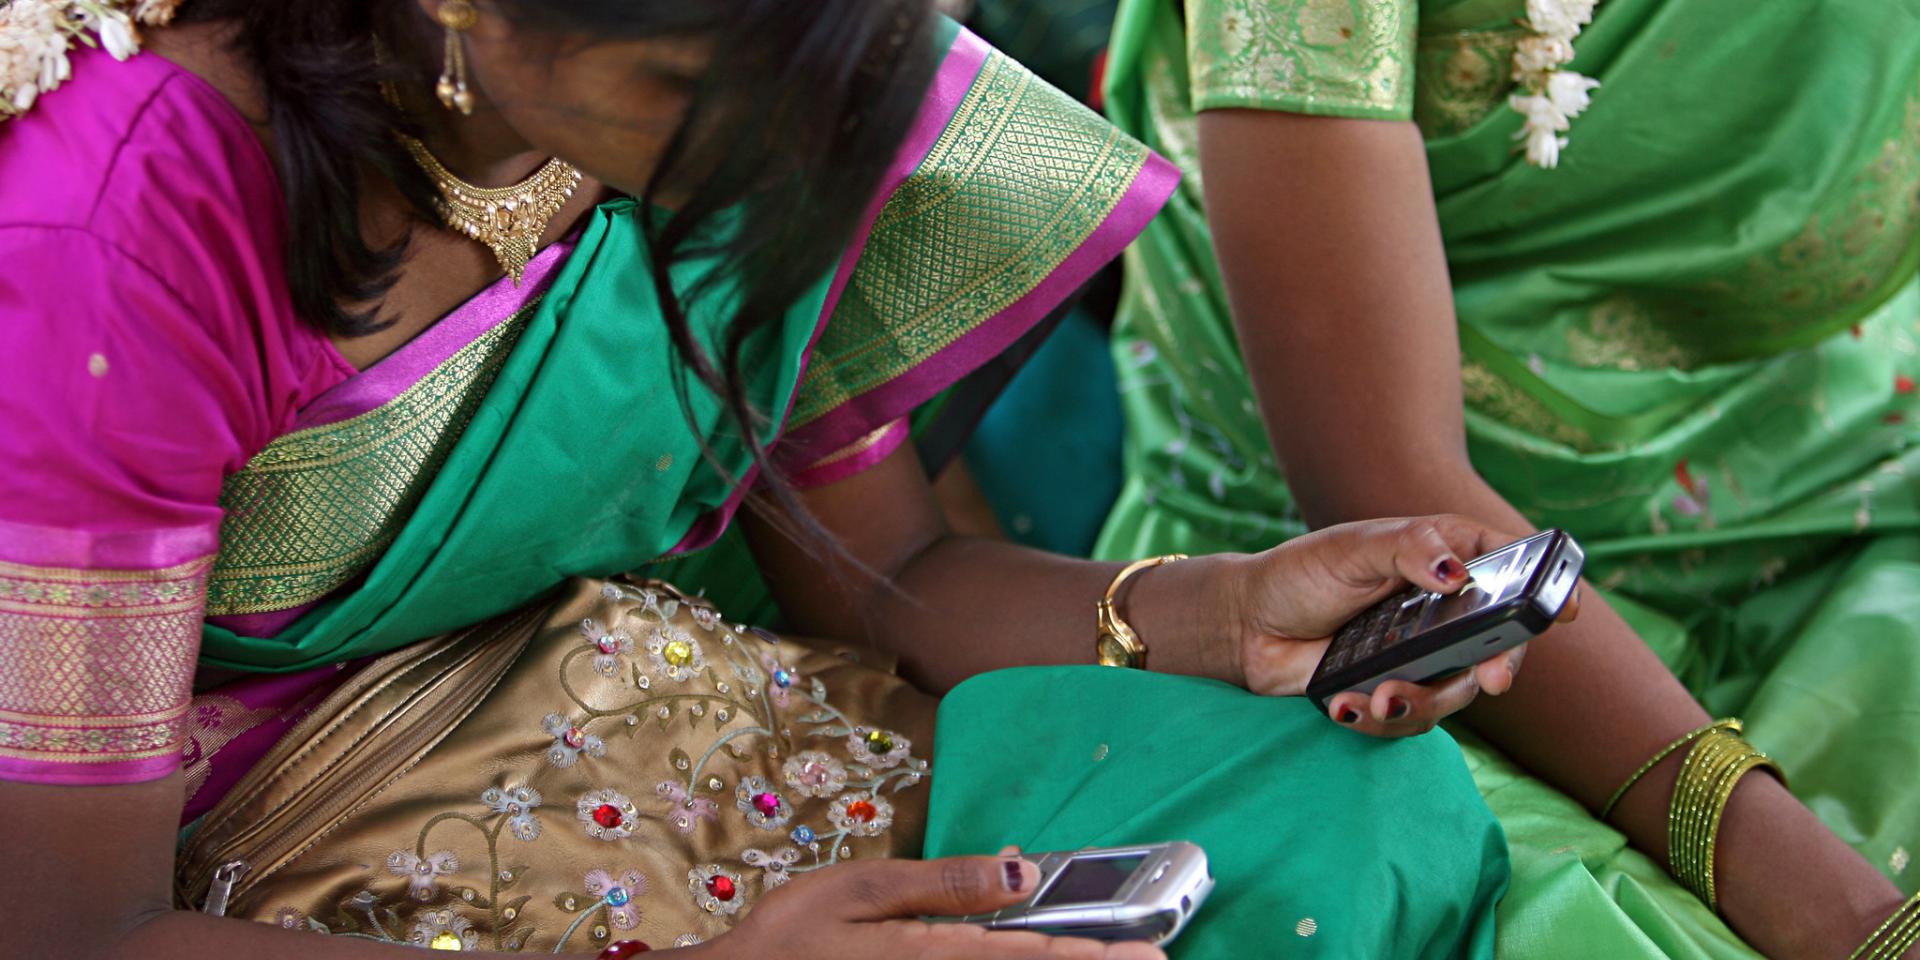 Two young Indian women look at two cellphones